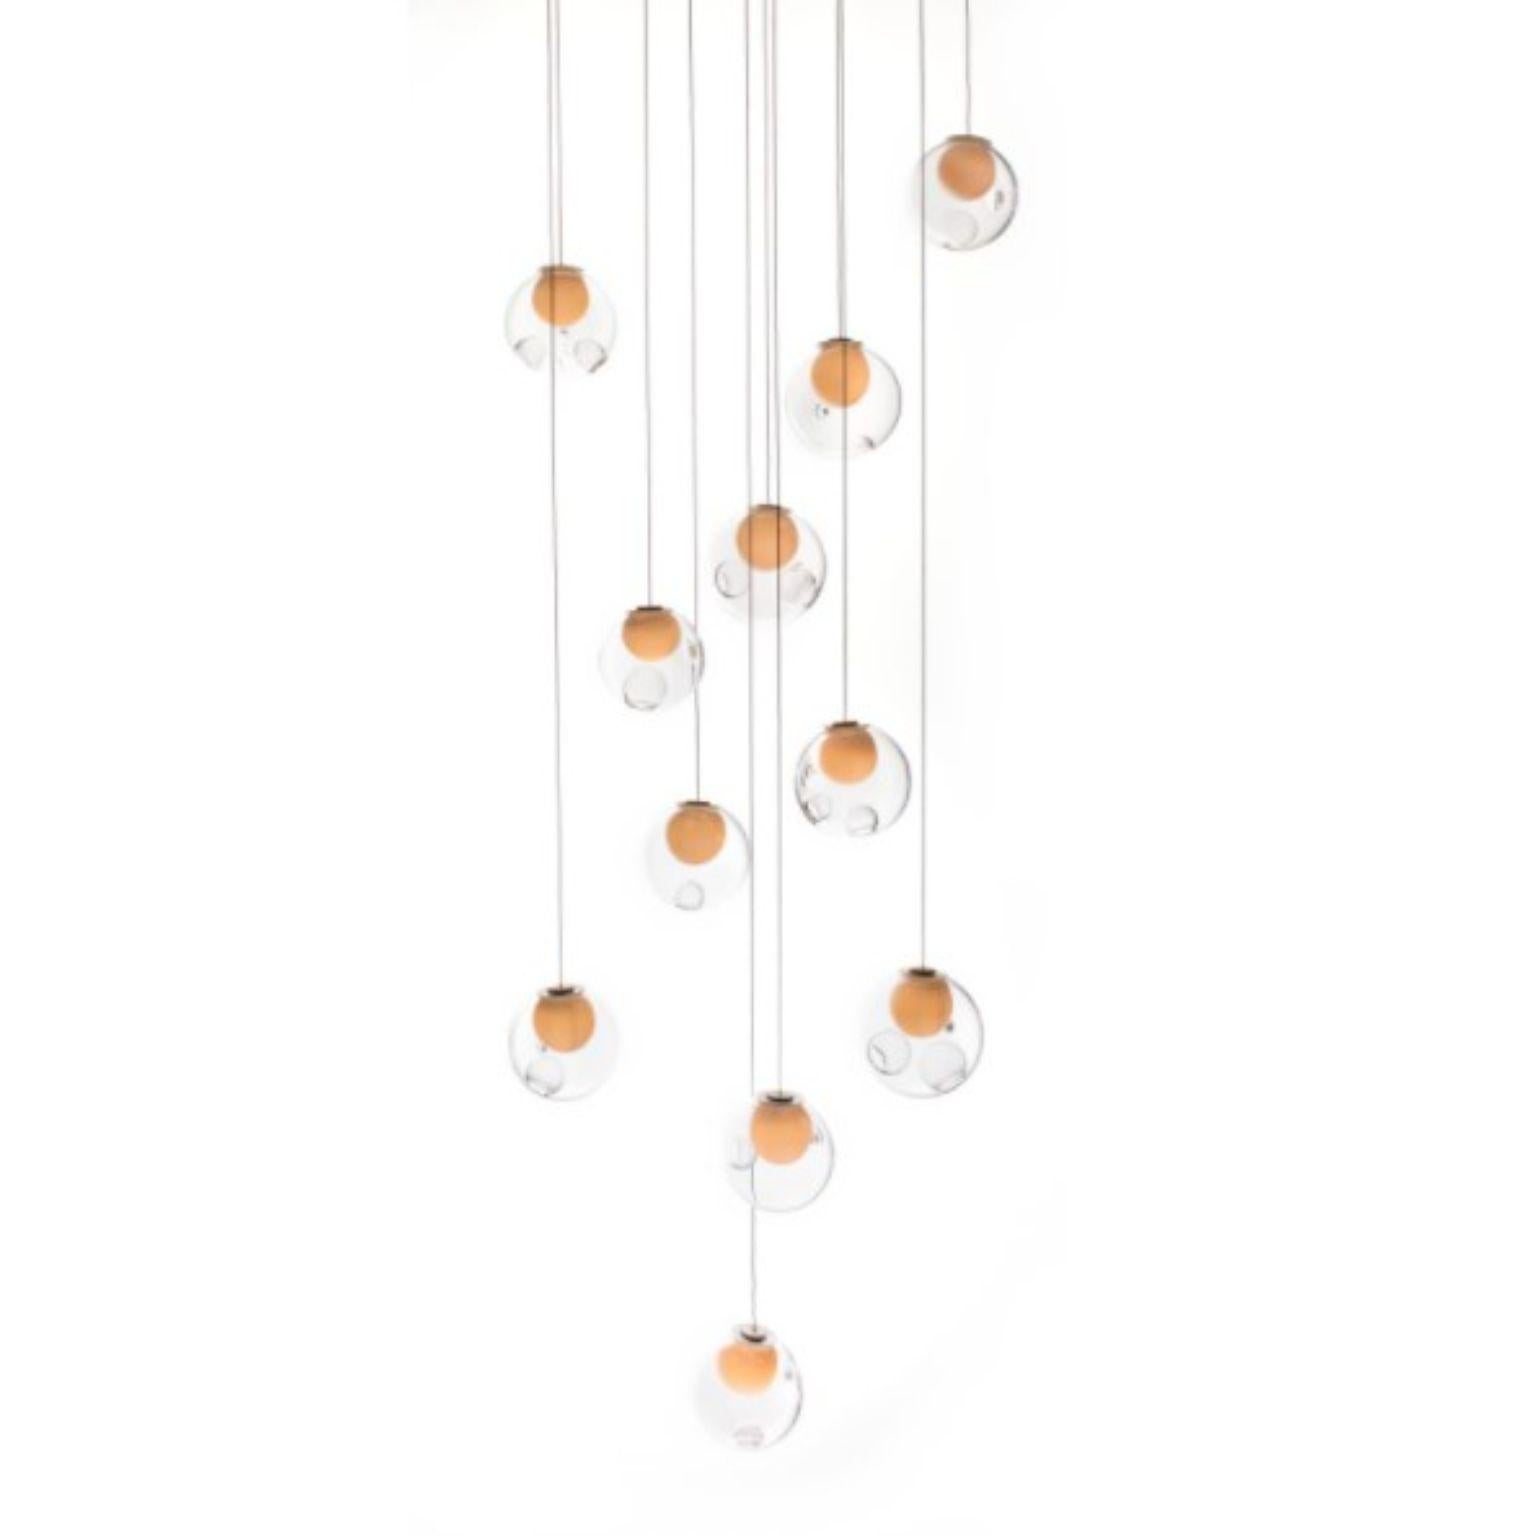 28.11 pendant by Bocci
Dimensions: D 60 x H 300 cm
Materials: diameter brushed nickel canopy
Weight: 29 kg
Also available in different dimensions.

All our lamps can be wired according to each country. If sold to the USA it will be wired for